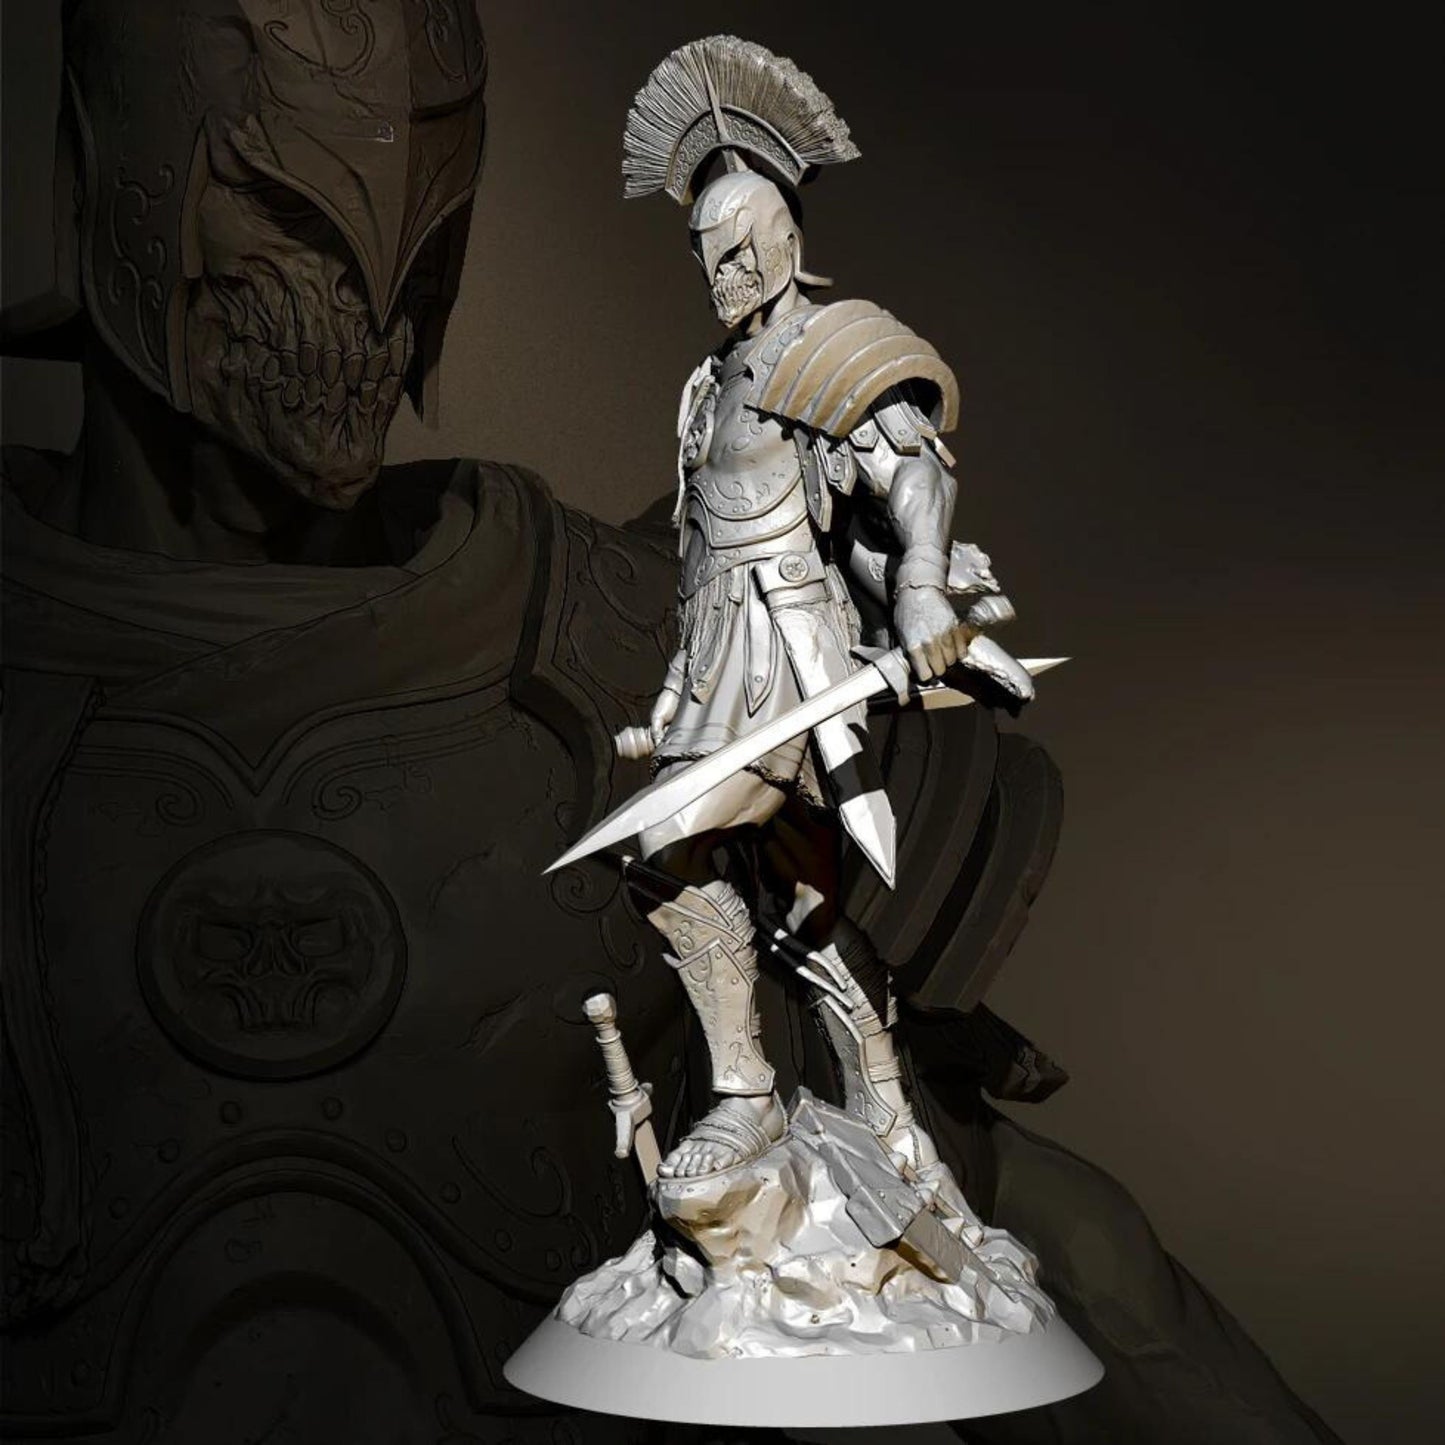 18+ Collector's 3D Printed Model:  55mm 75mm Resin model kits figure colorless and self-assembled.